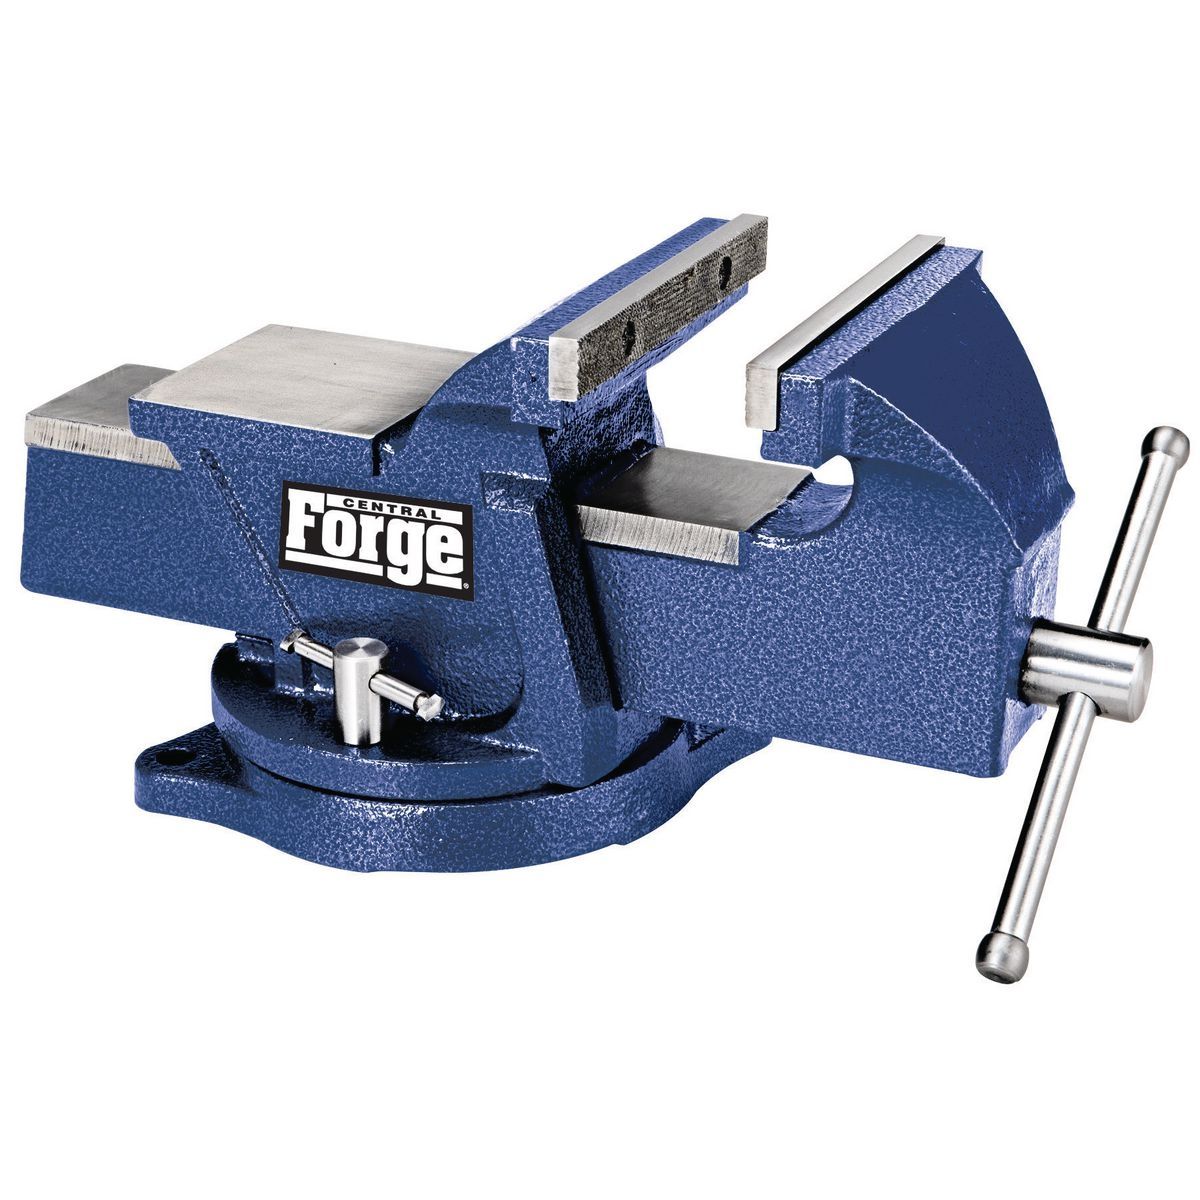 CENTRAL FORGE 6 in. Swivel Vise with Anvil